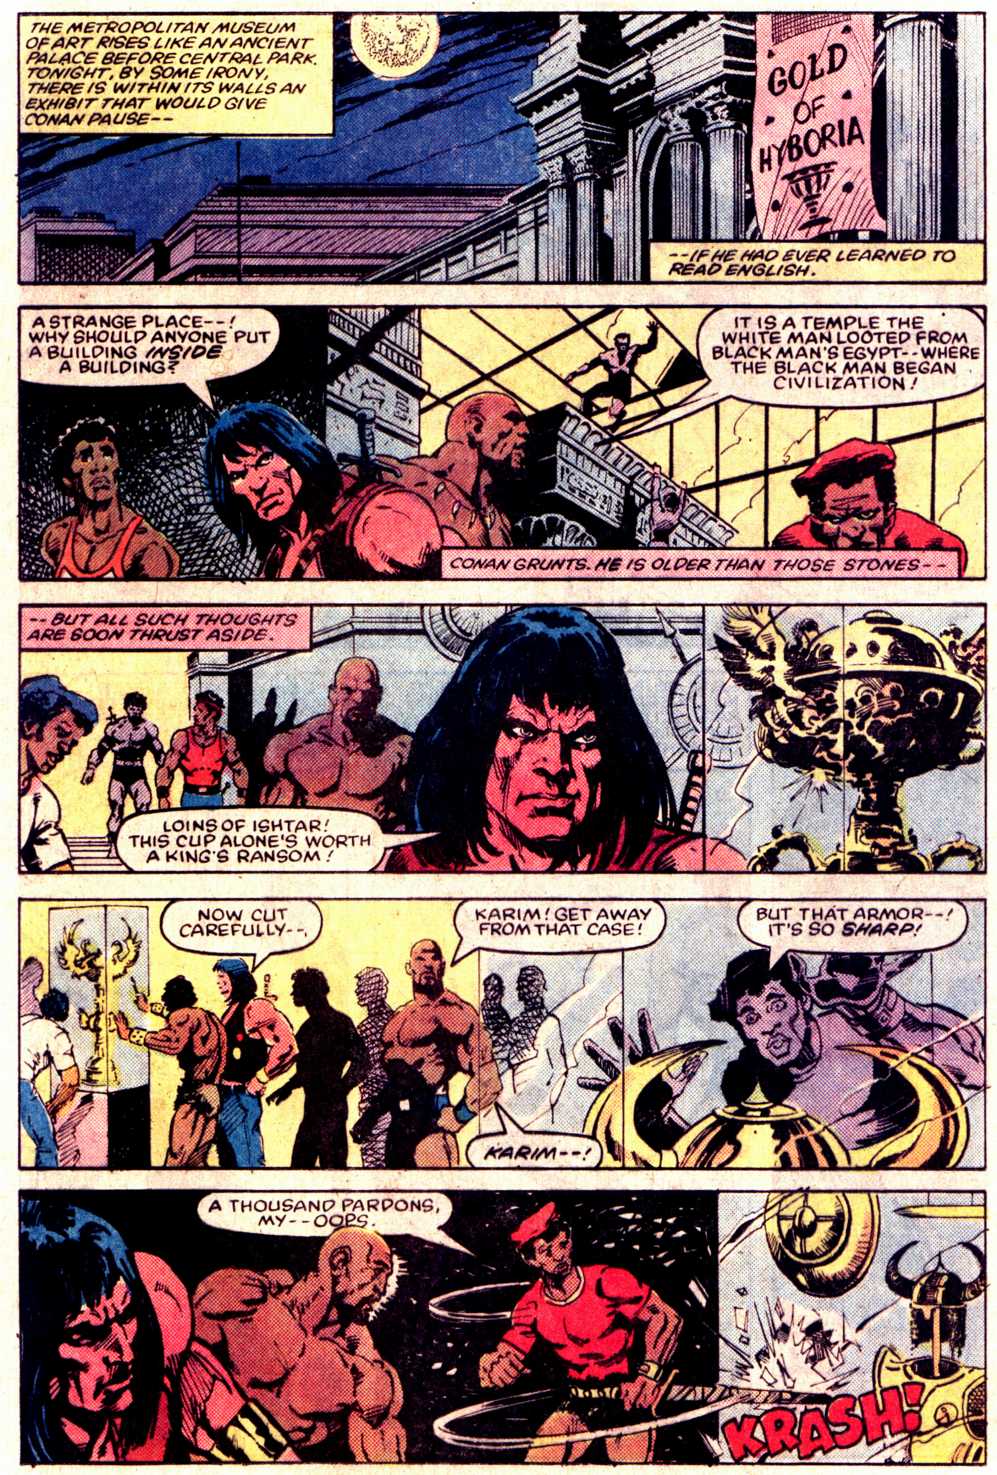 What If? (1977) issue 43 - Conan the Barbarian were stranded in the 20th century - Page 19